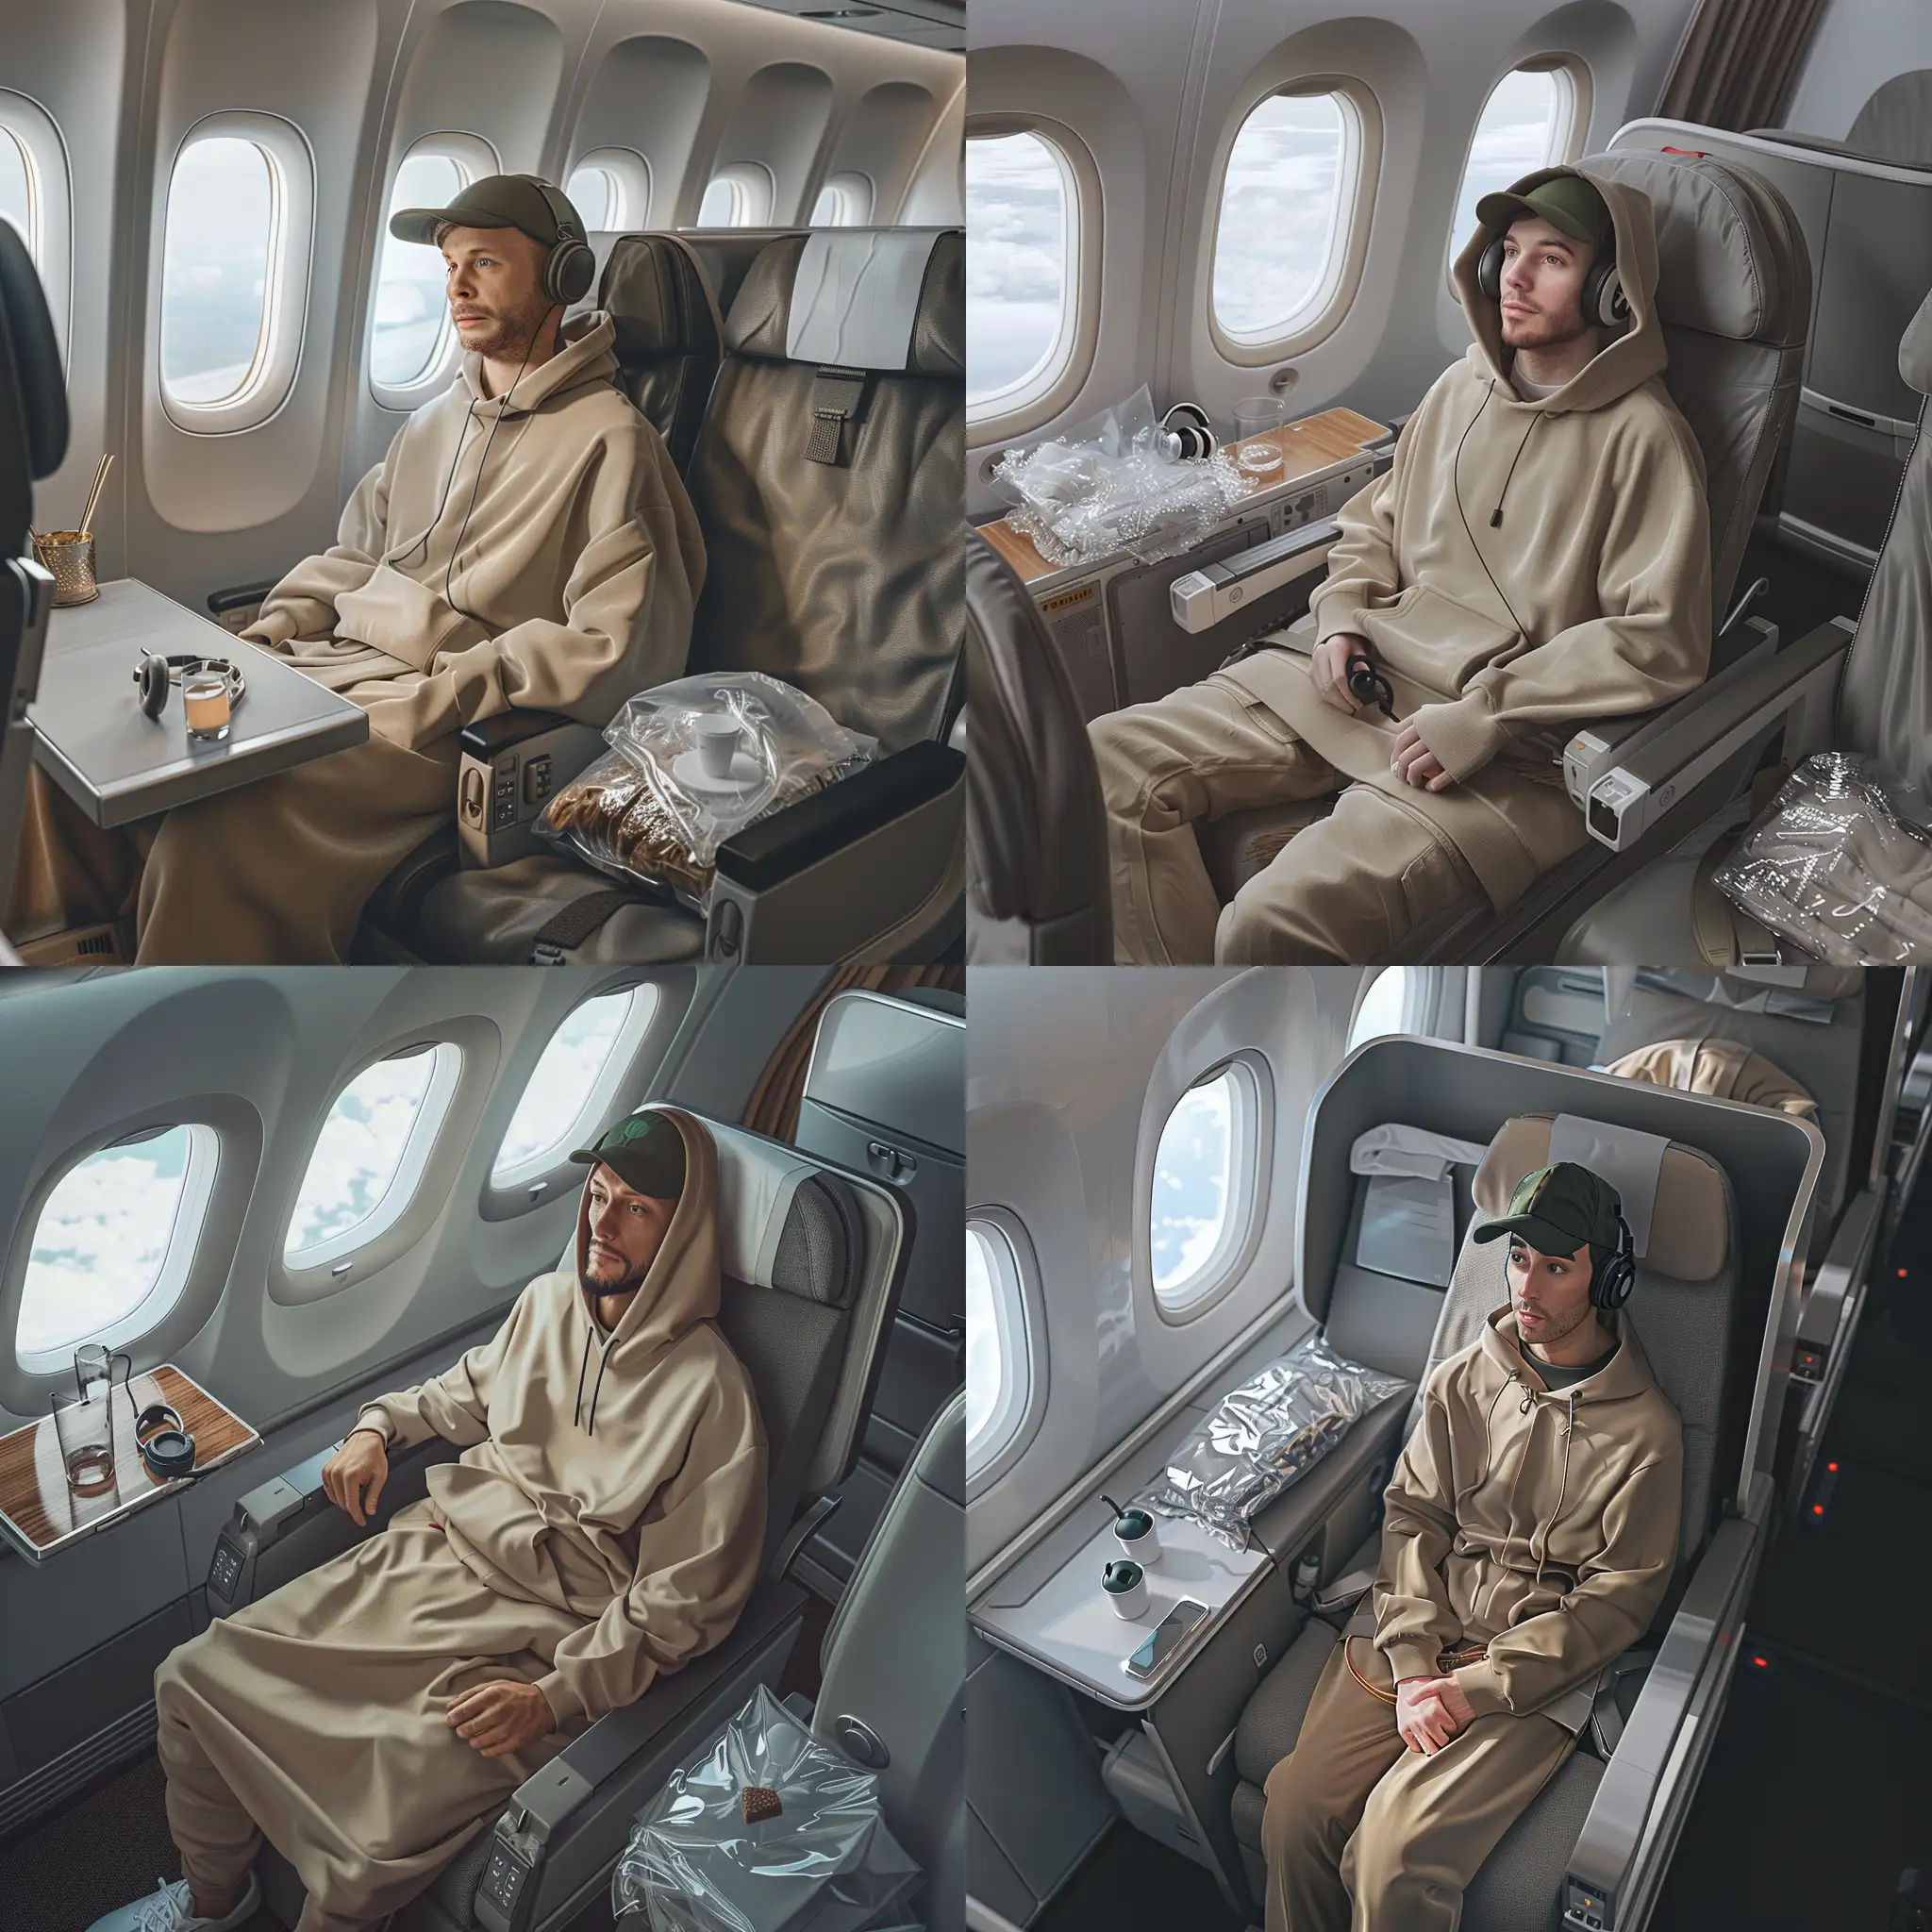 Photorealistic photo of a man seating comfortably in a spacious, grey airplane seat, wearing a beige hoodie and a dark green cap, he is looking forward, the camera is shooting from the top side angle, two windows are visible to the left of the person, letting in natural light, a small table is extended from the side of the seat, holding headphones and two empty cups, there’s a plastic-wrapped item, possibly a blanket or amenity kit, placed beside the person on another seat, intricate details, hyperrealistic, 